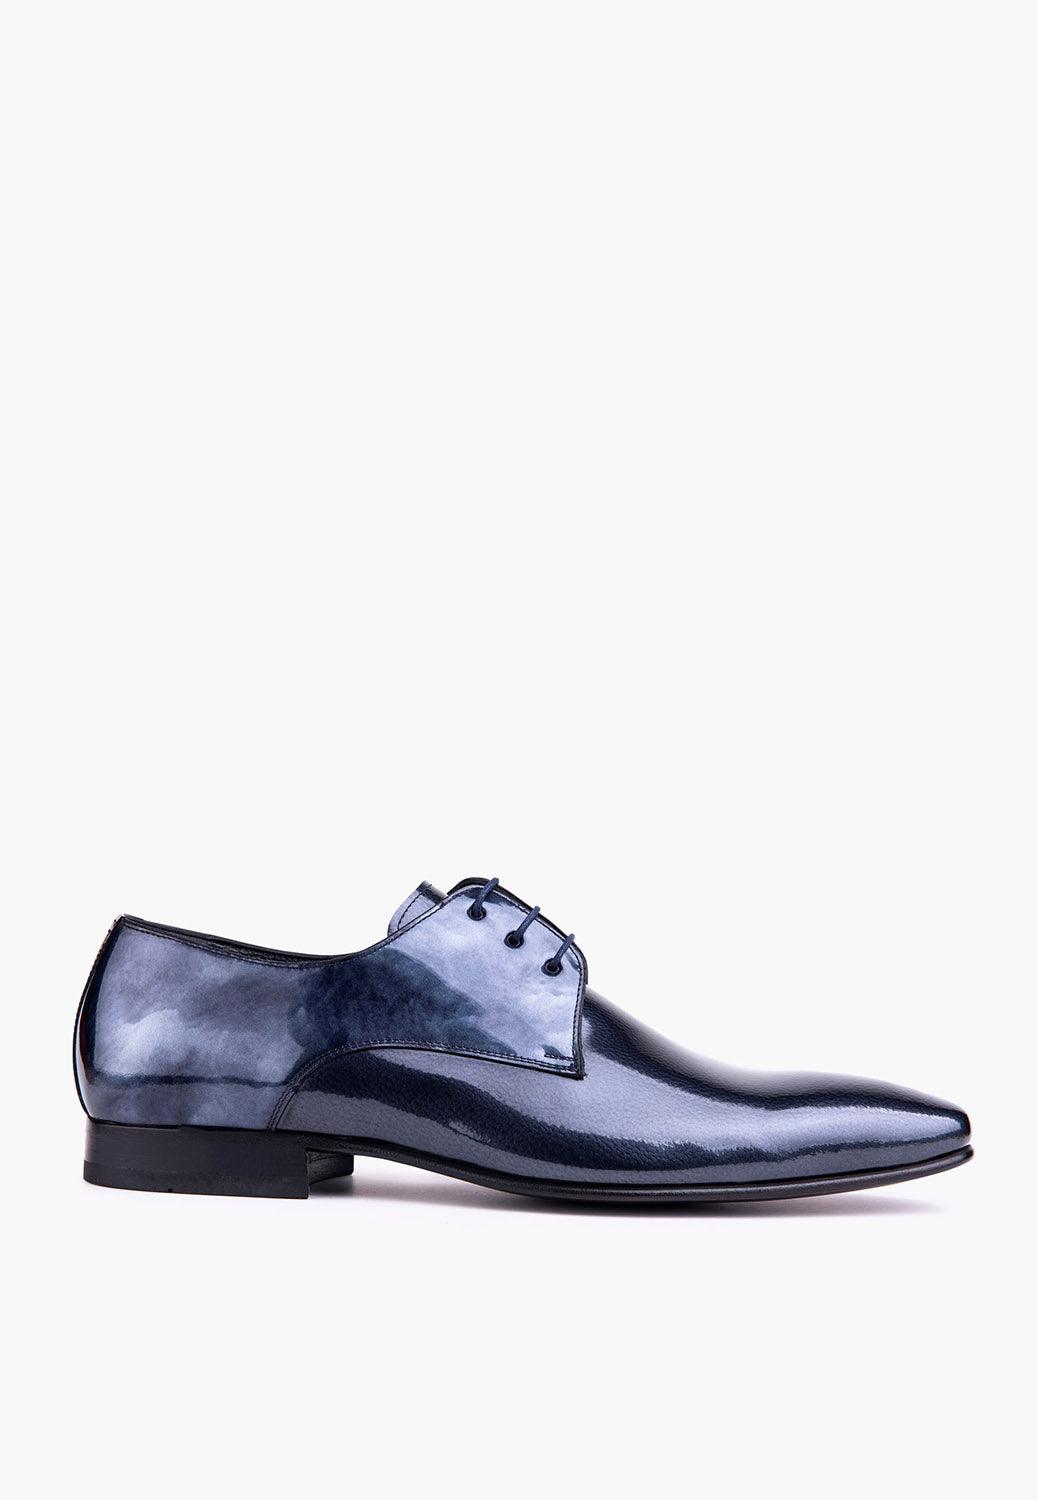 Chic Lace Up Grey-Navy - SEPOL Shoes